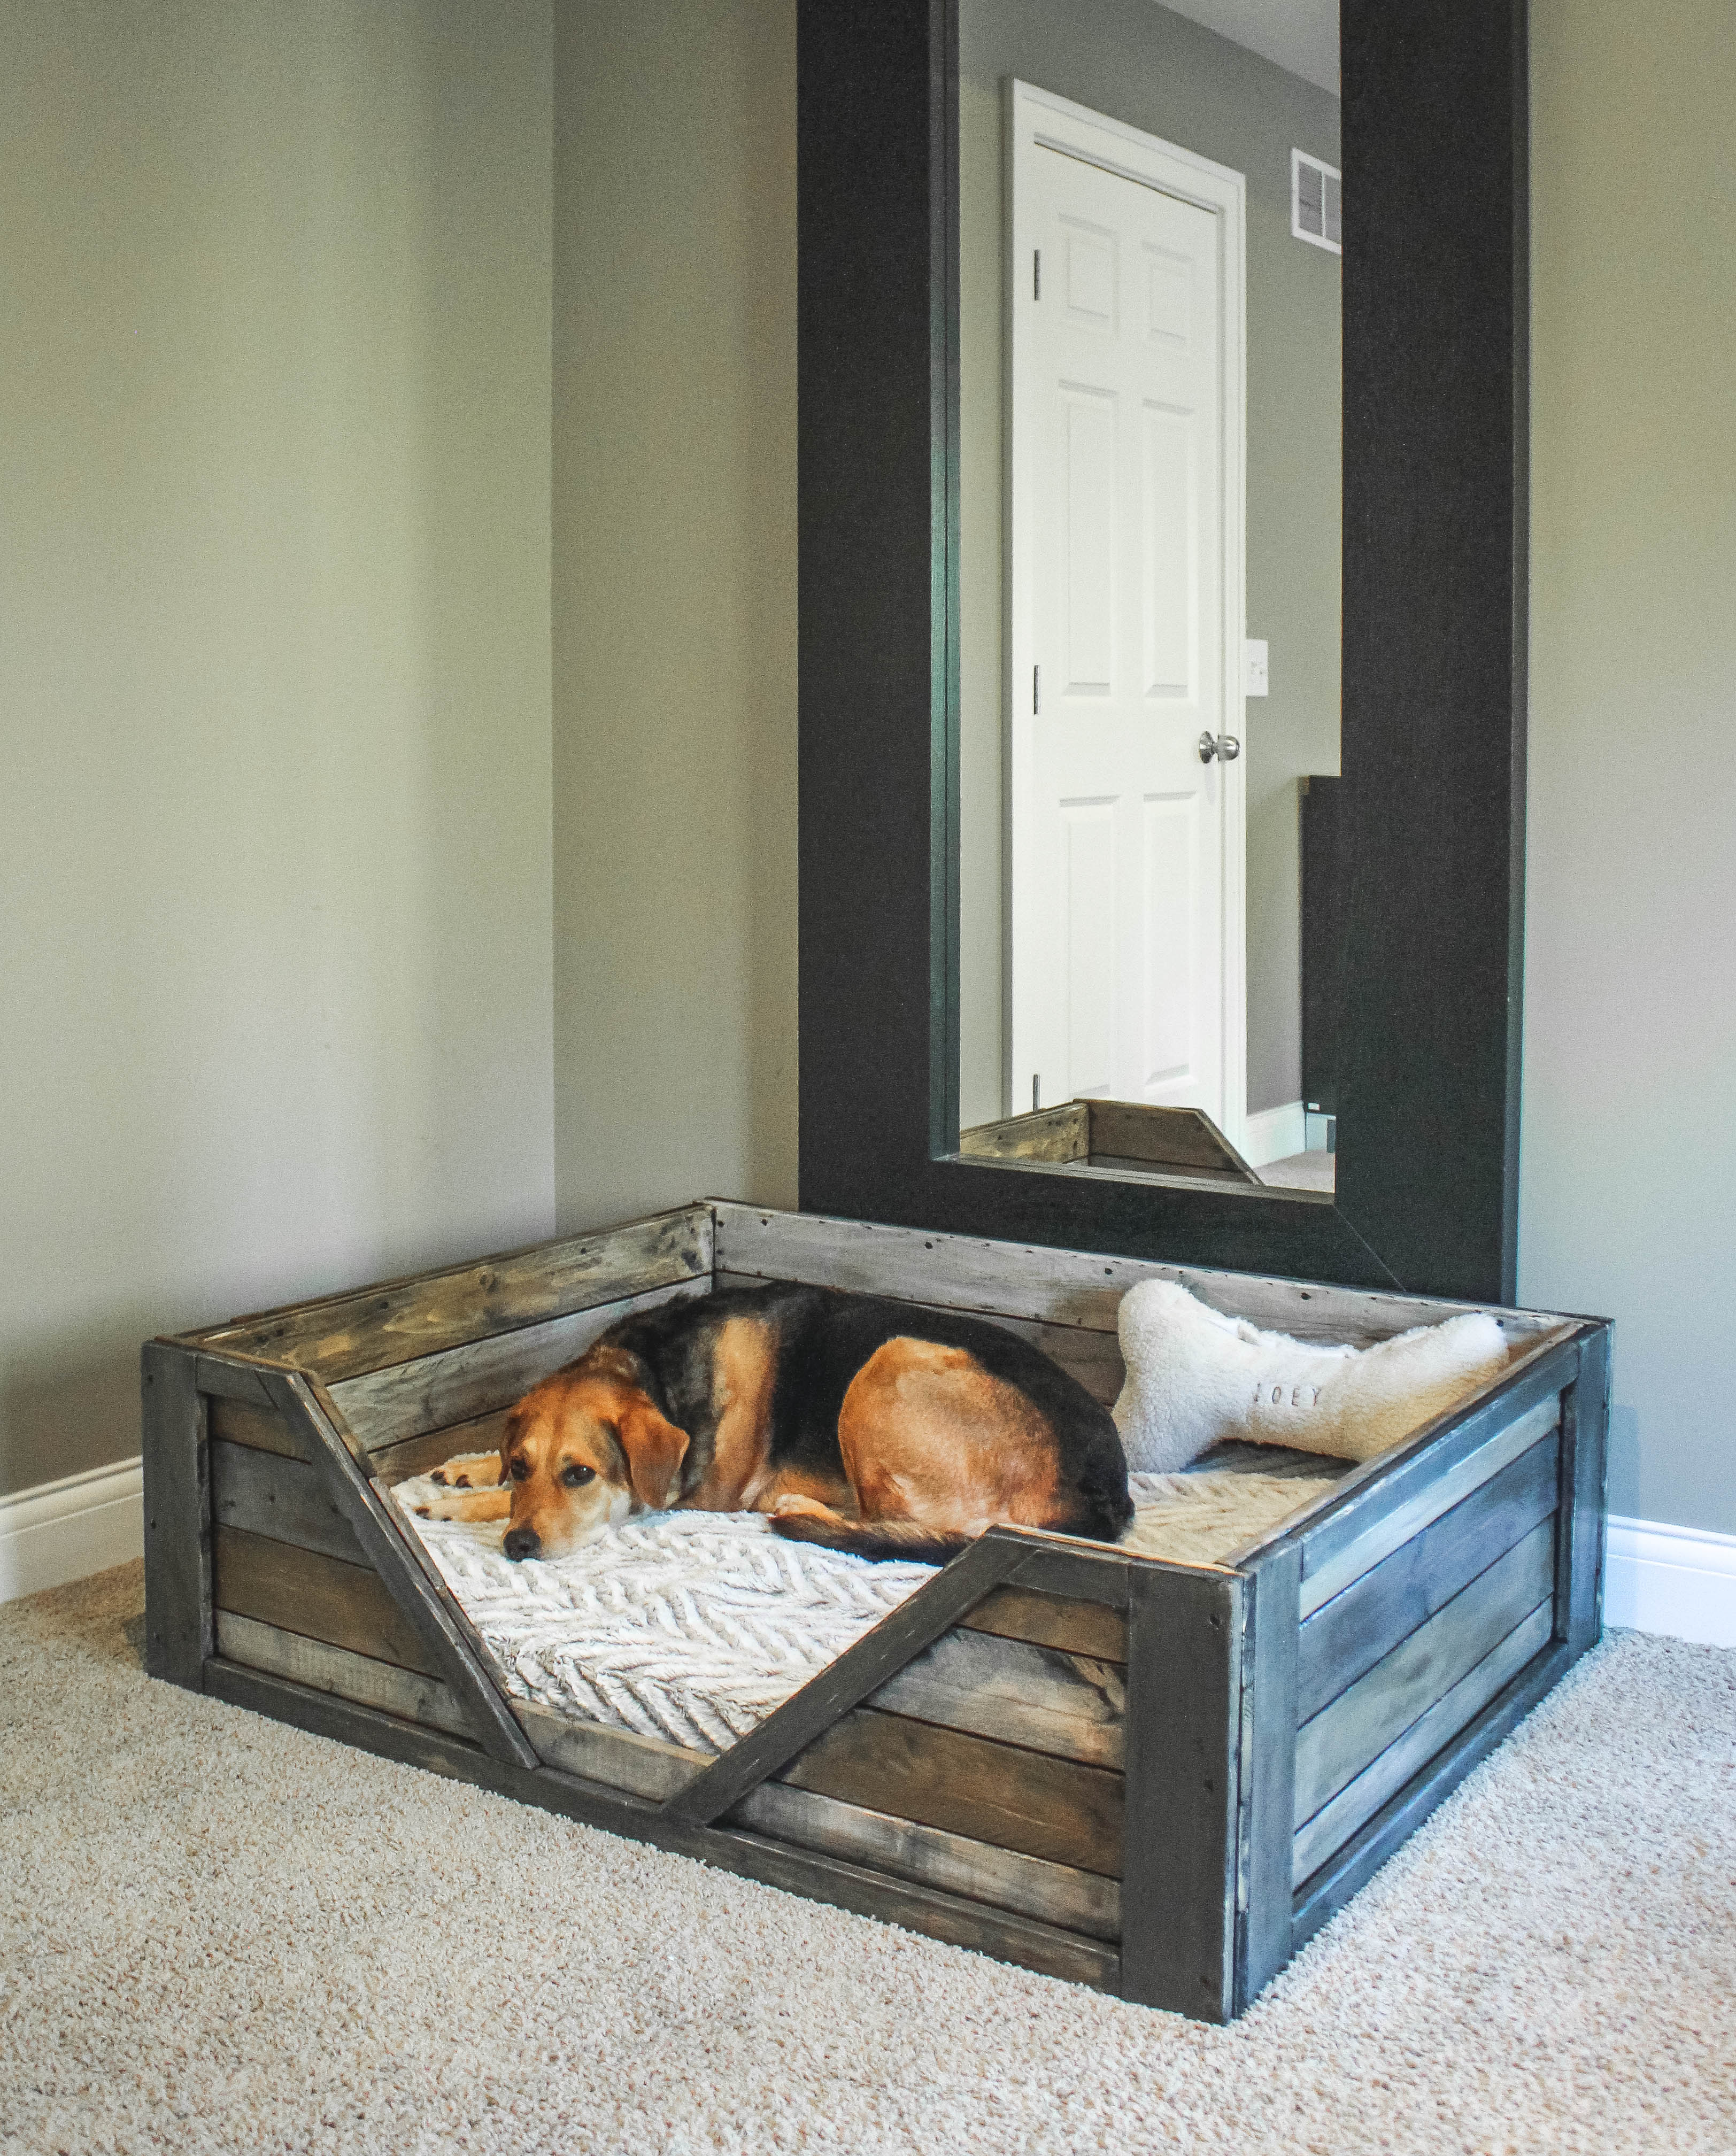 Recycled pallet bed frames for your home hometshetics 8.jpg